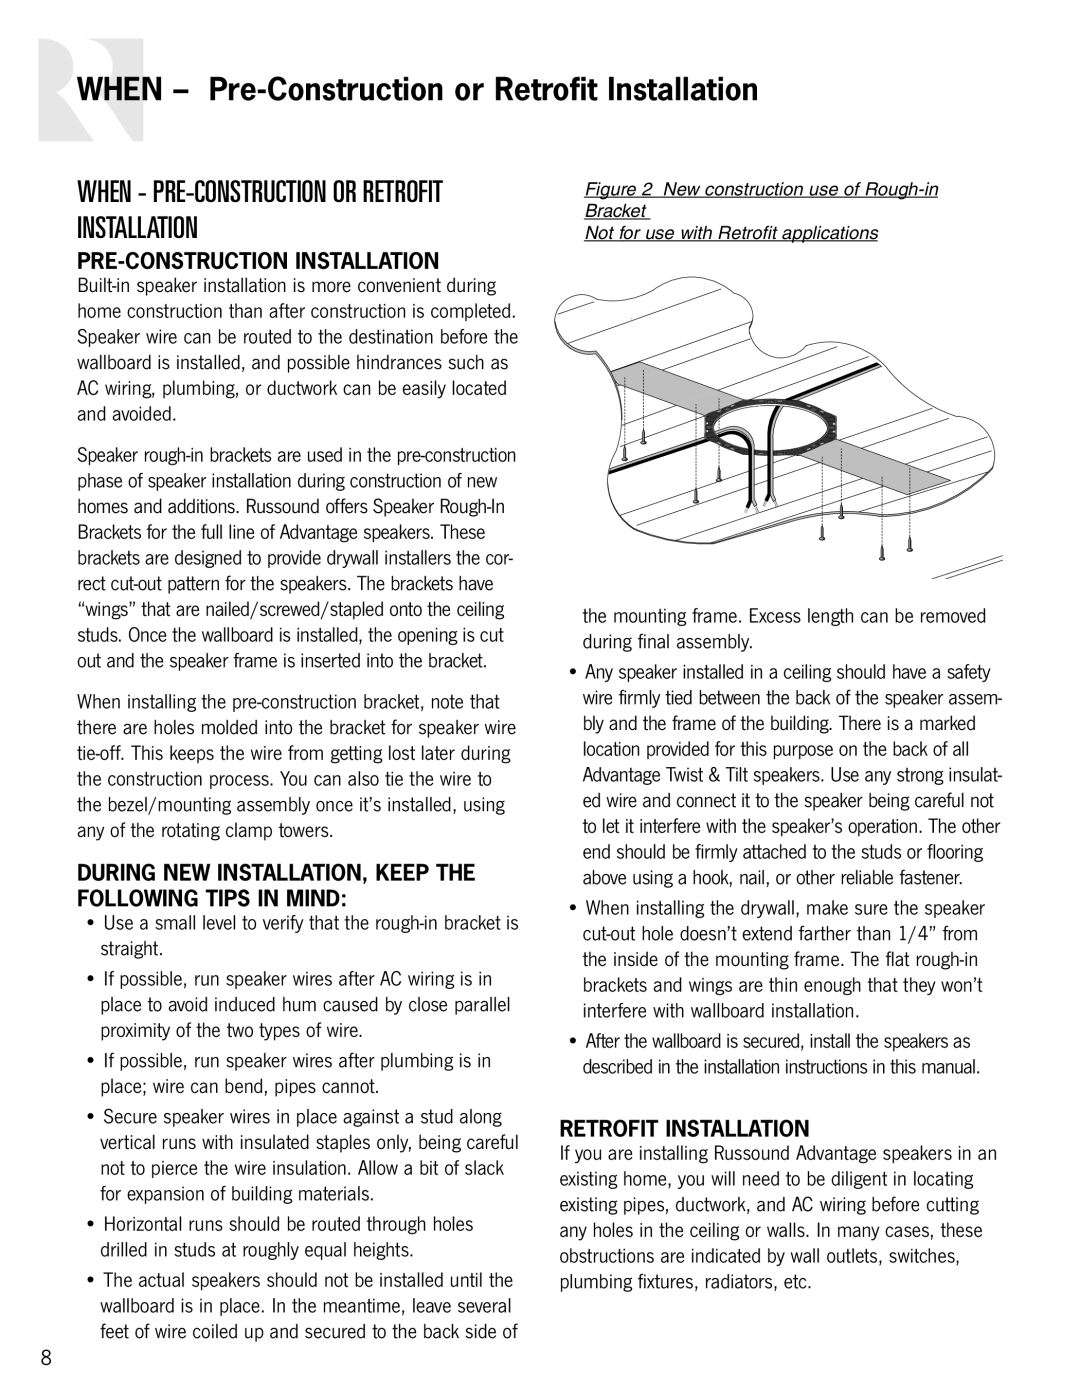 Russound In-Ceiling speaker owner manual WHEN - Pre-Constructionor Retrofit Installation 